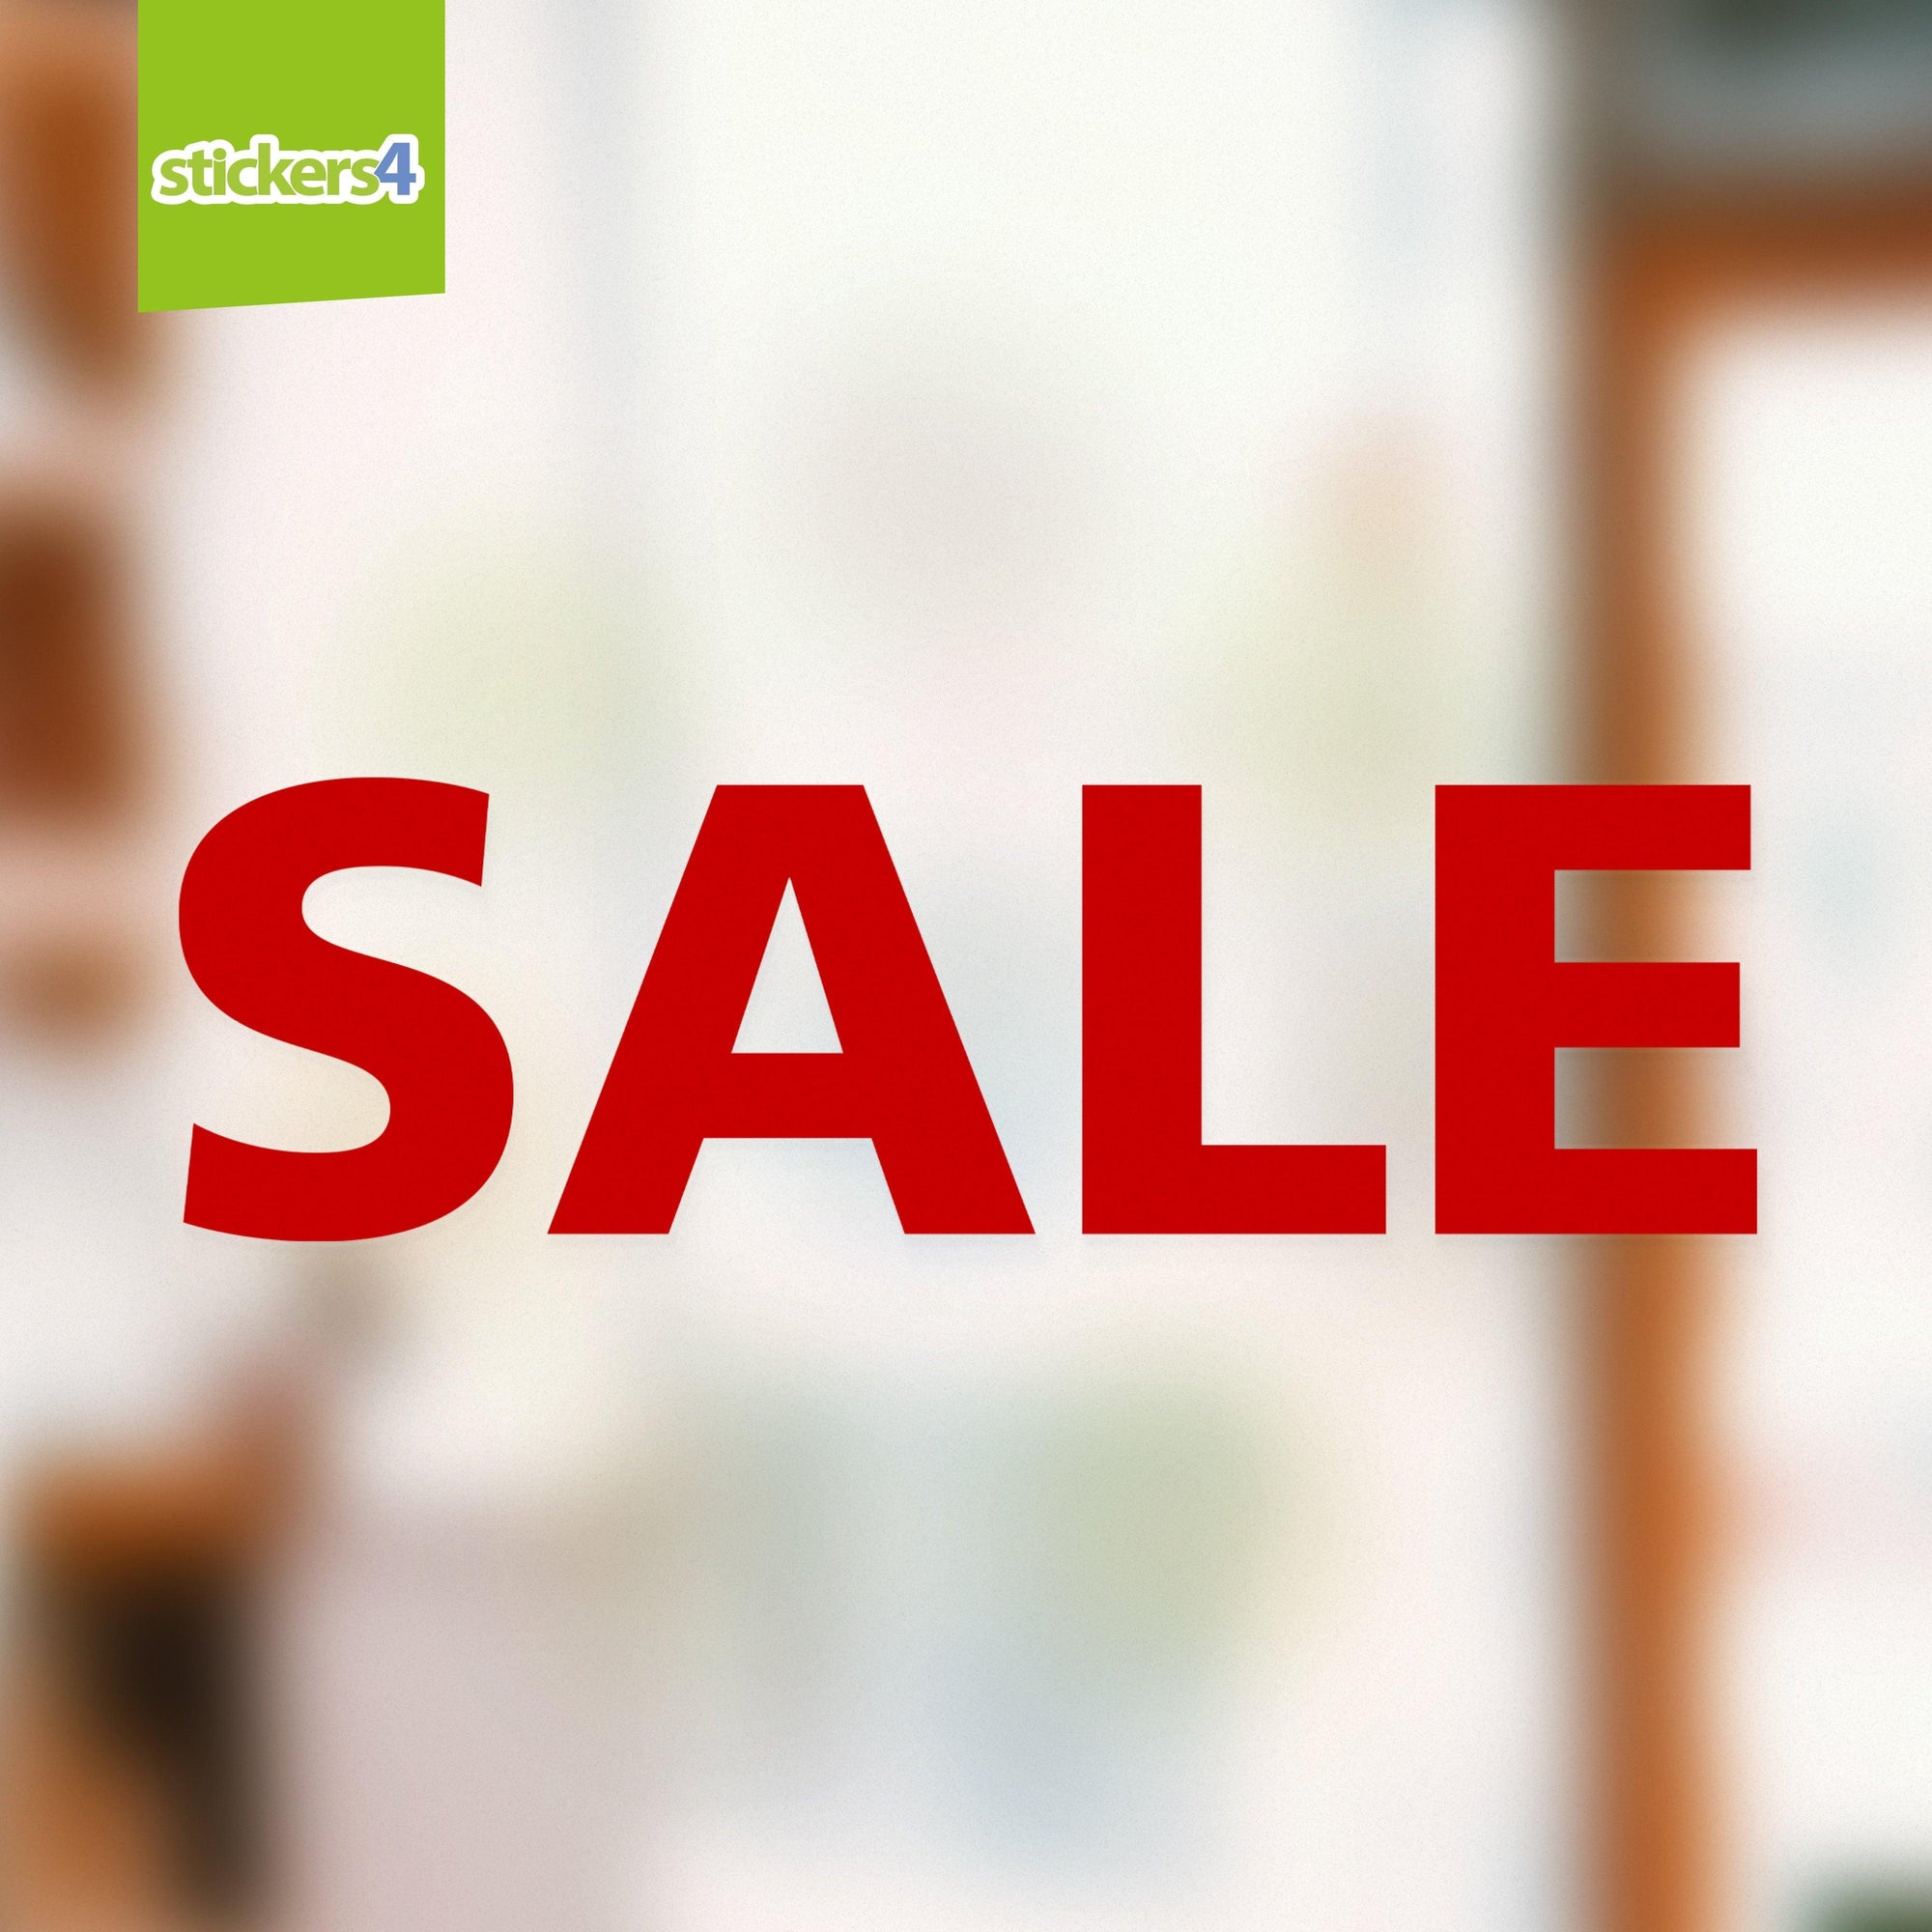 Large SALE Shop Window Sticker - Red on Clear Retail Window Display